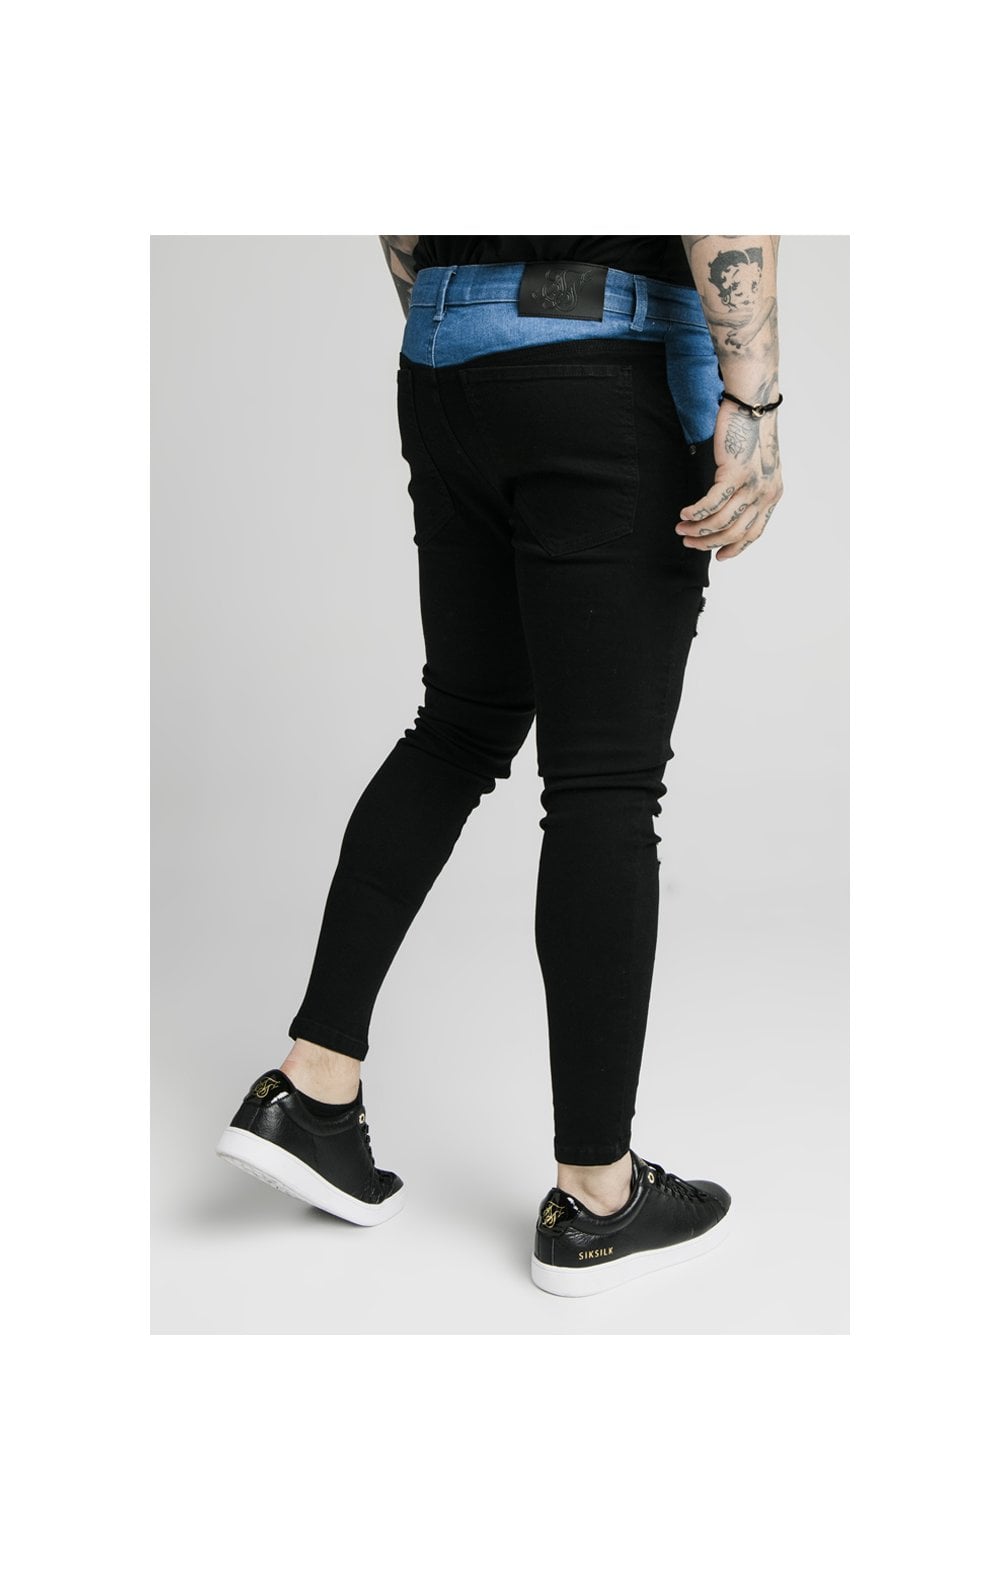 SikSilk Contrast Distressed Skinny Jeans - Washed Black & Midstone (2)